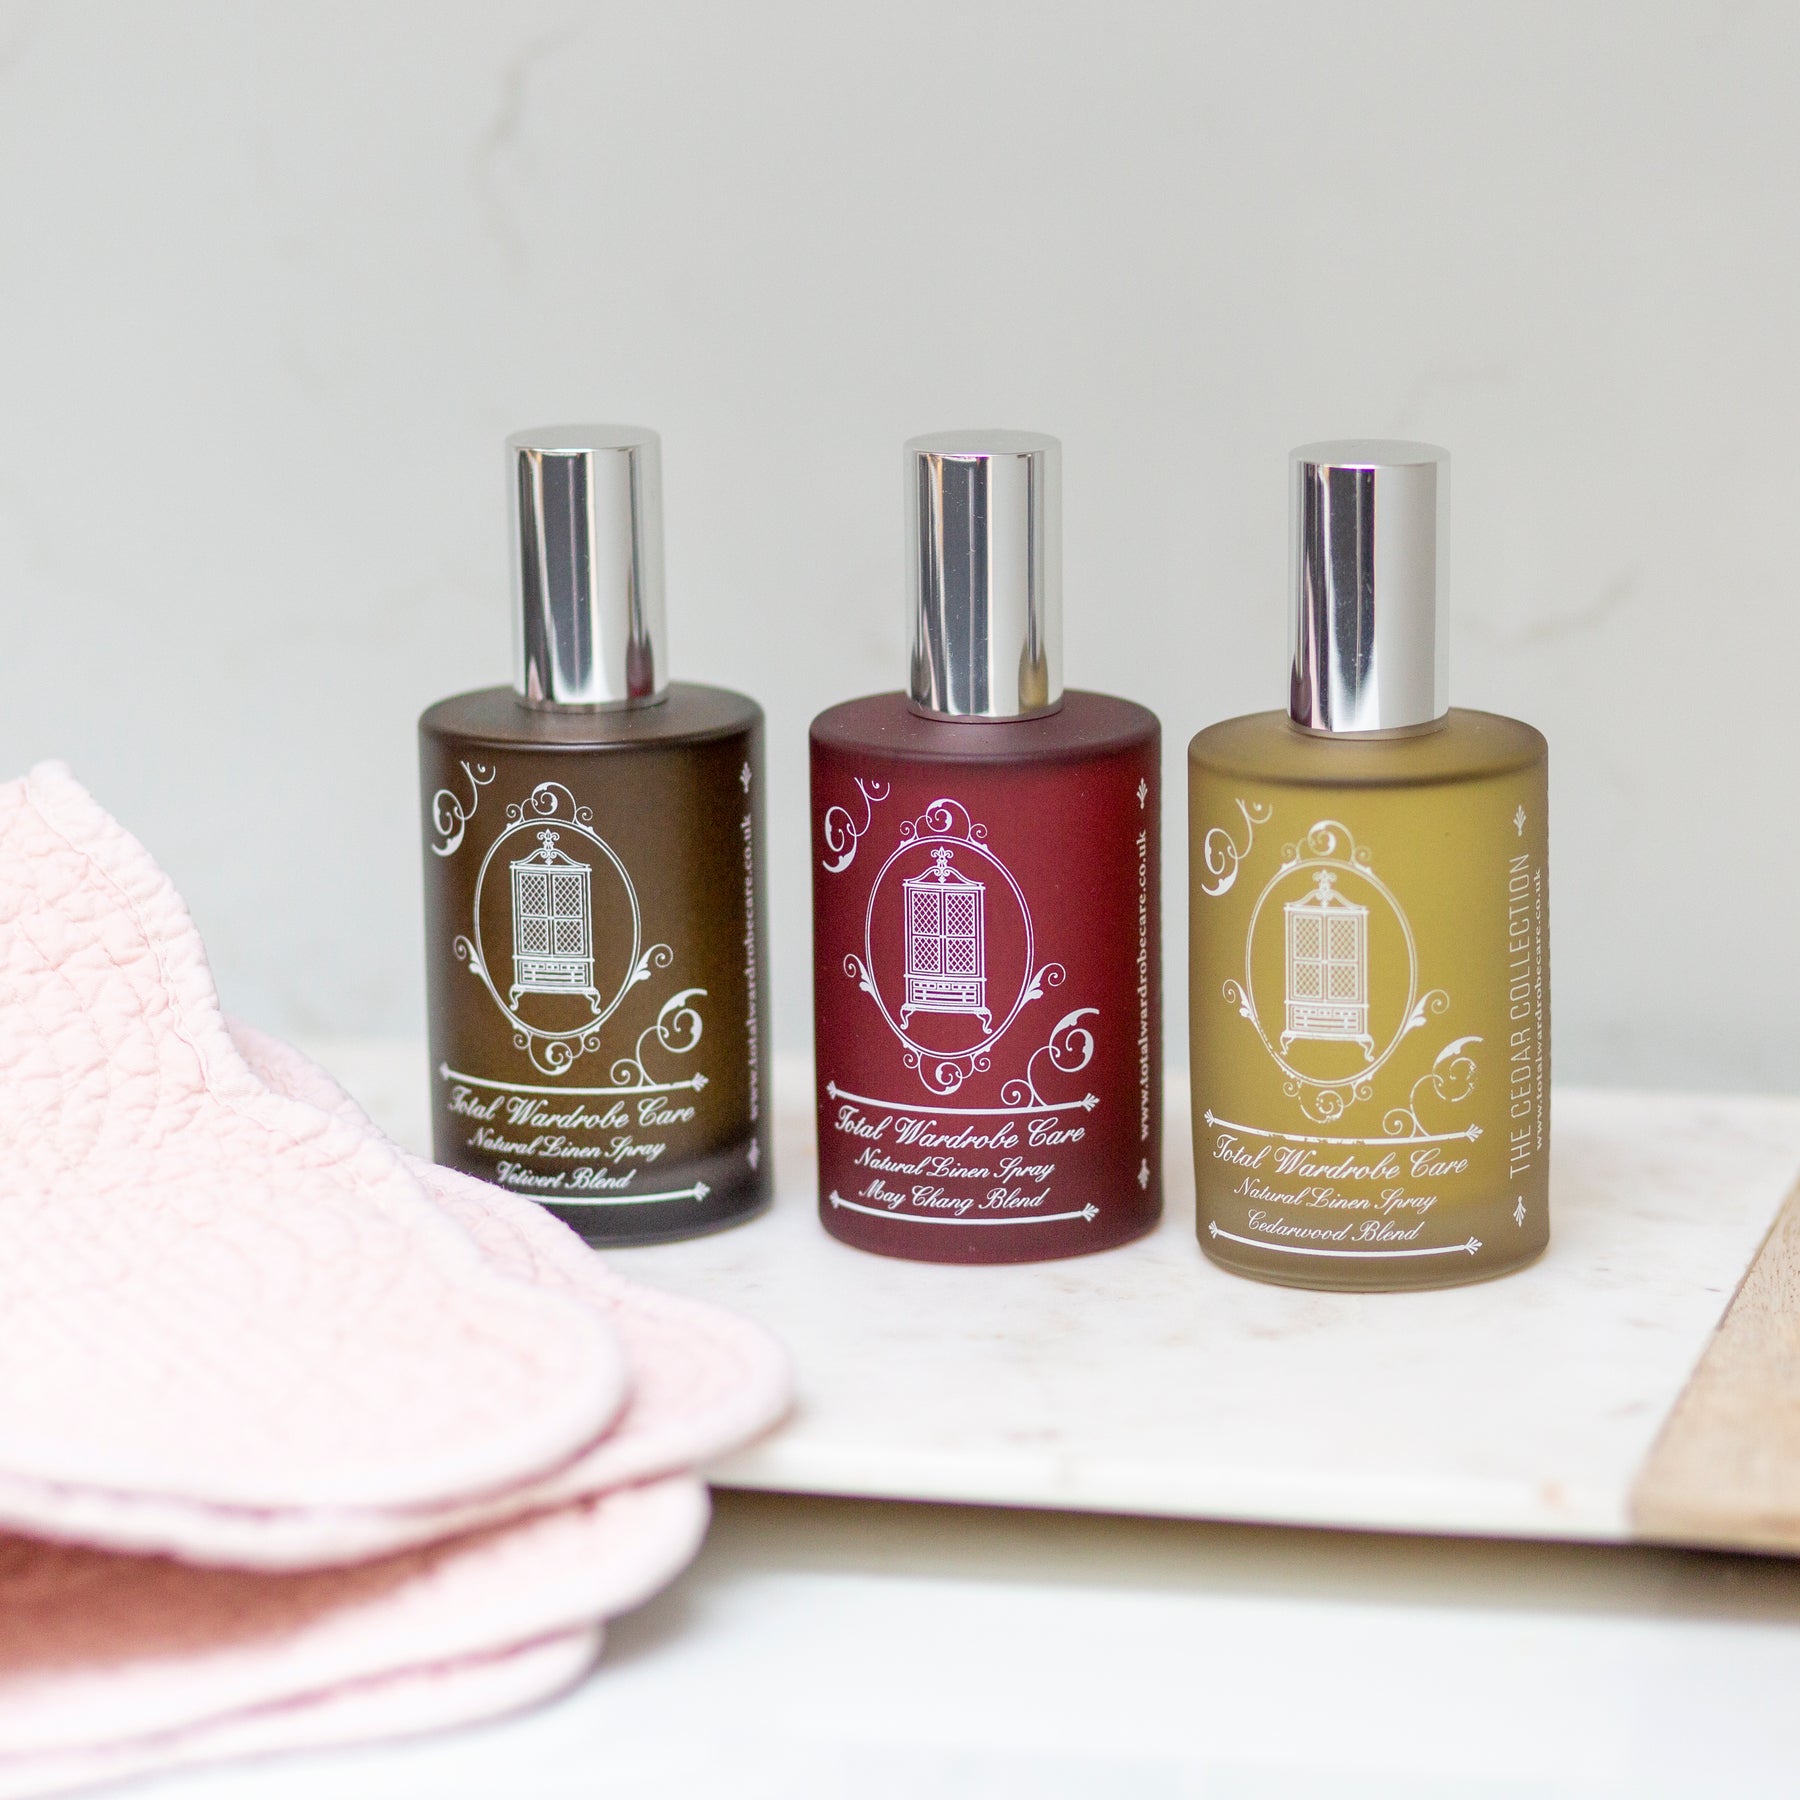 Total Wardrobe Care linen sprays lined up with all 3 scents. Vetivert, May Chang and Cedarwood 